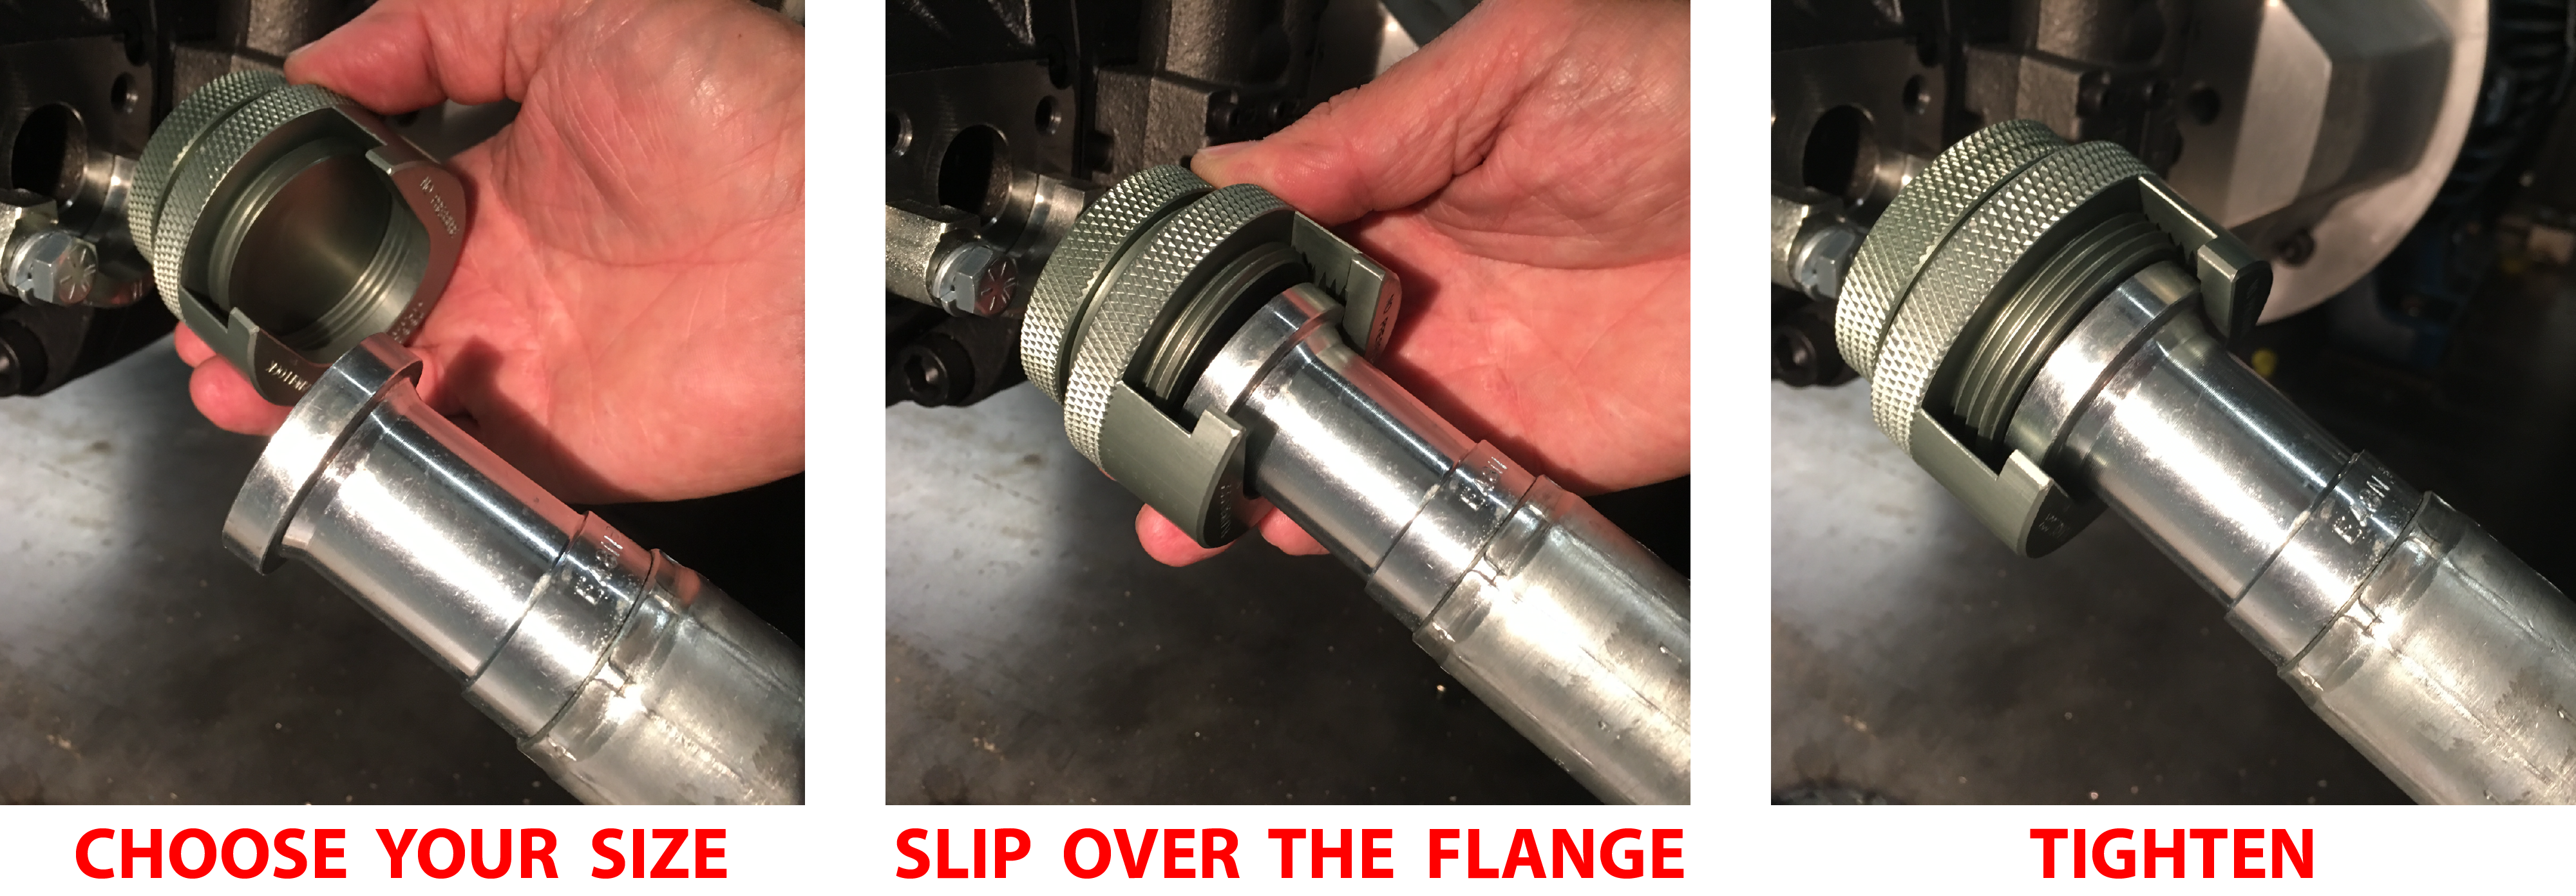 Using FlangeLock sleeve and plug to seal flange fitting